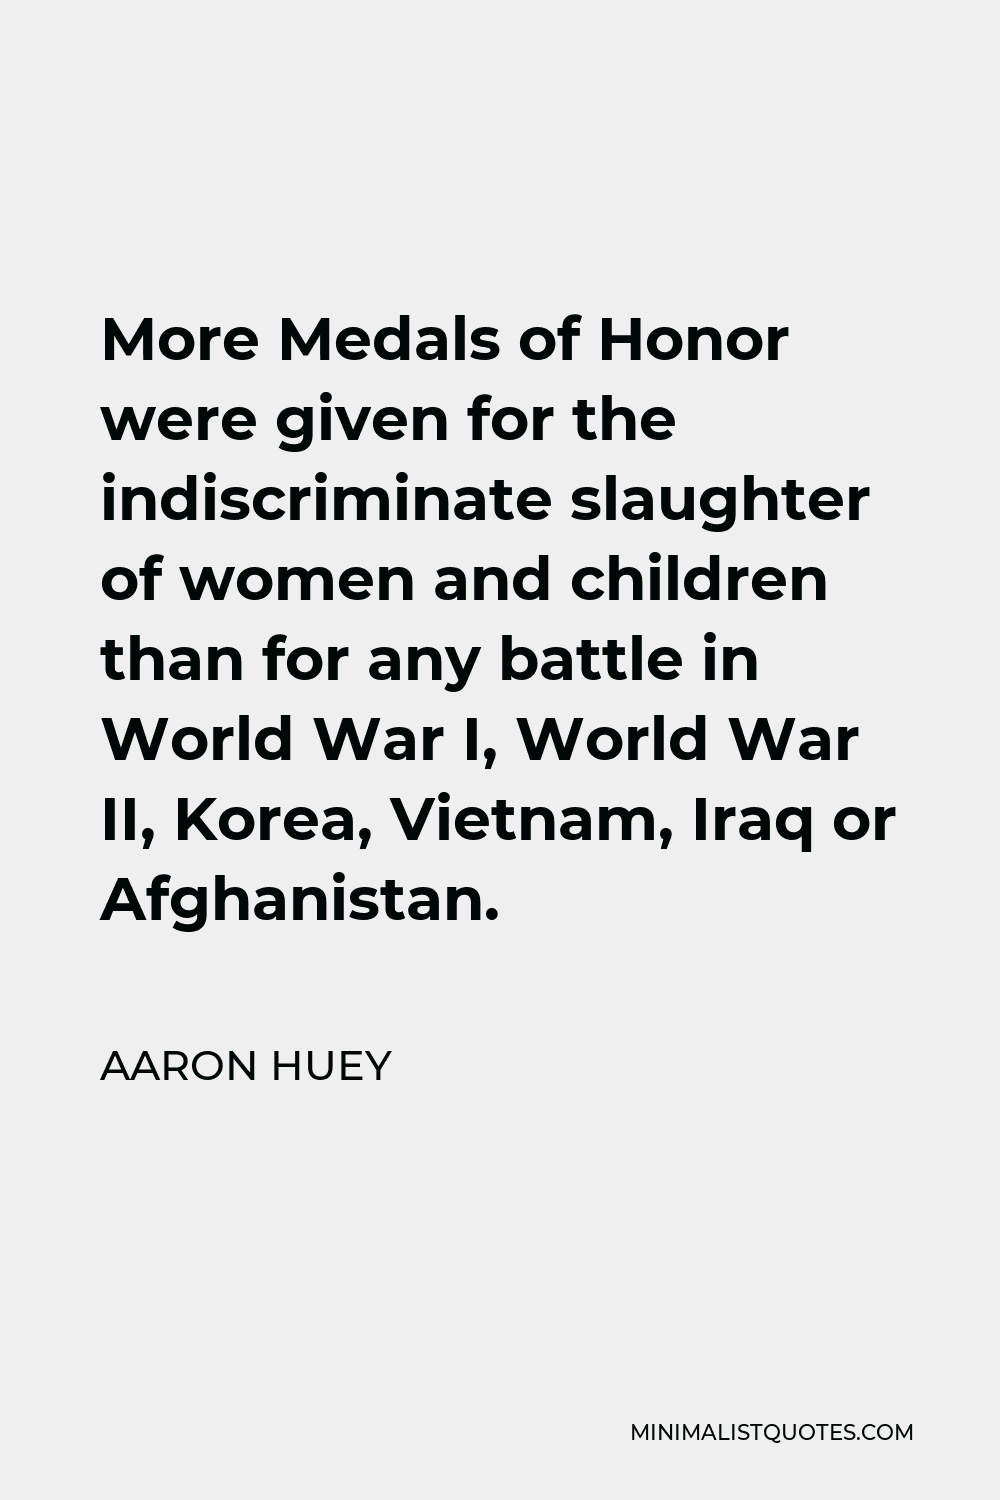 Aaron Huey Quote - More Medals of Honor were given for the indiscriminate slaughter of women and children than for any battle in World War I, World War II, Korea, Vietnam, Iraq or Afghanistan.